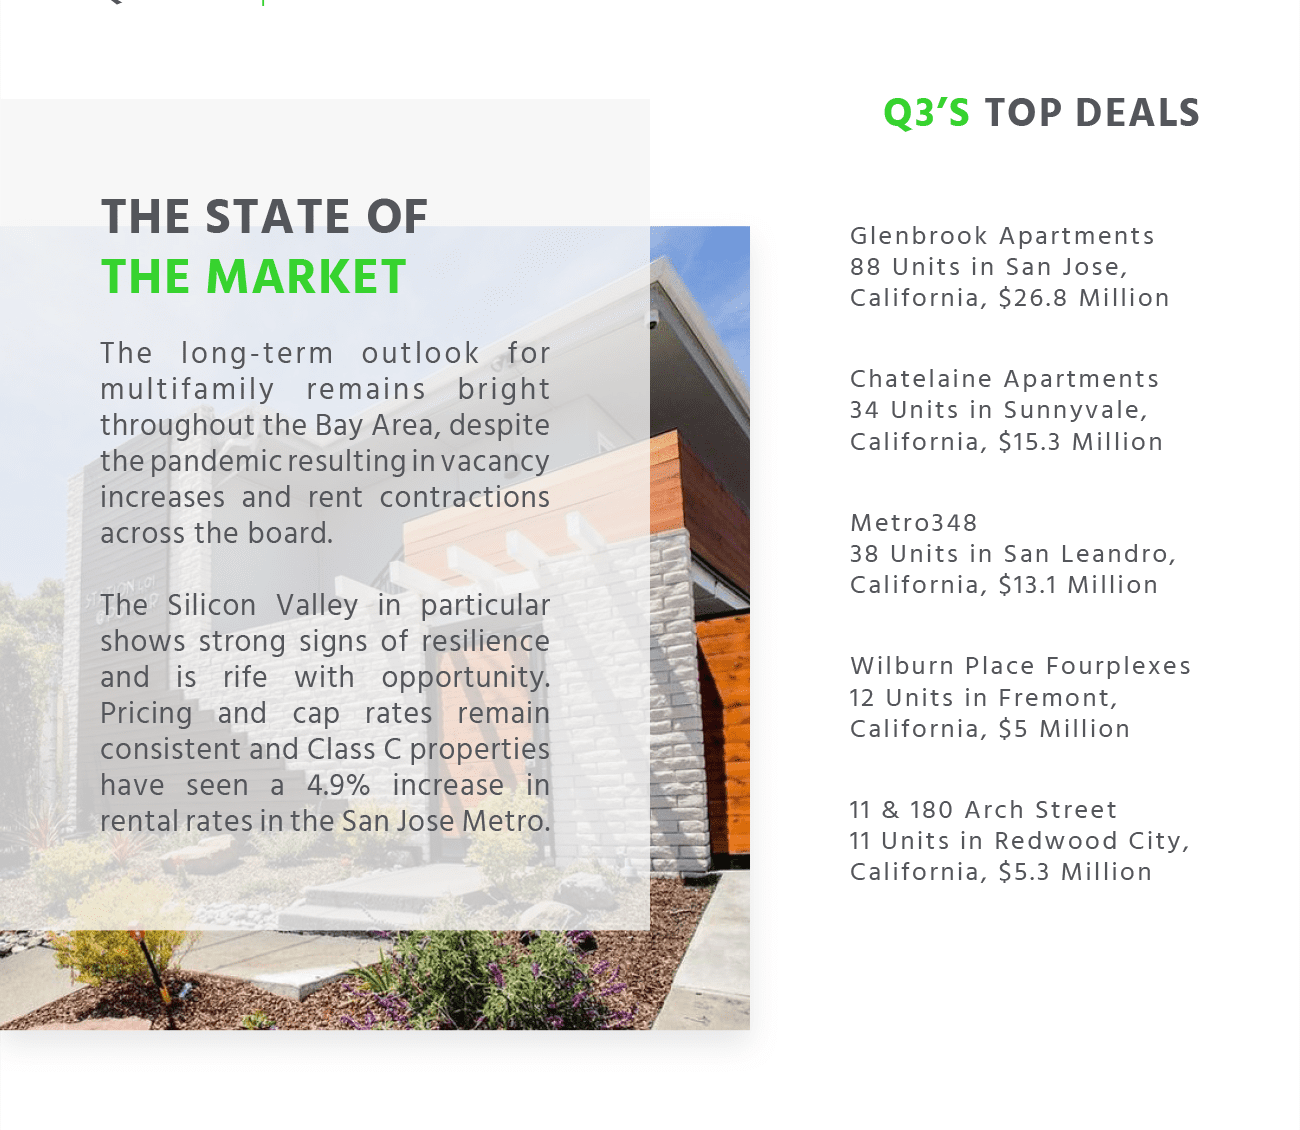 The State of the Market and Q3 Top Deals